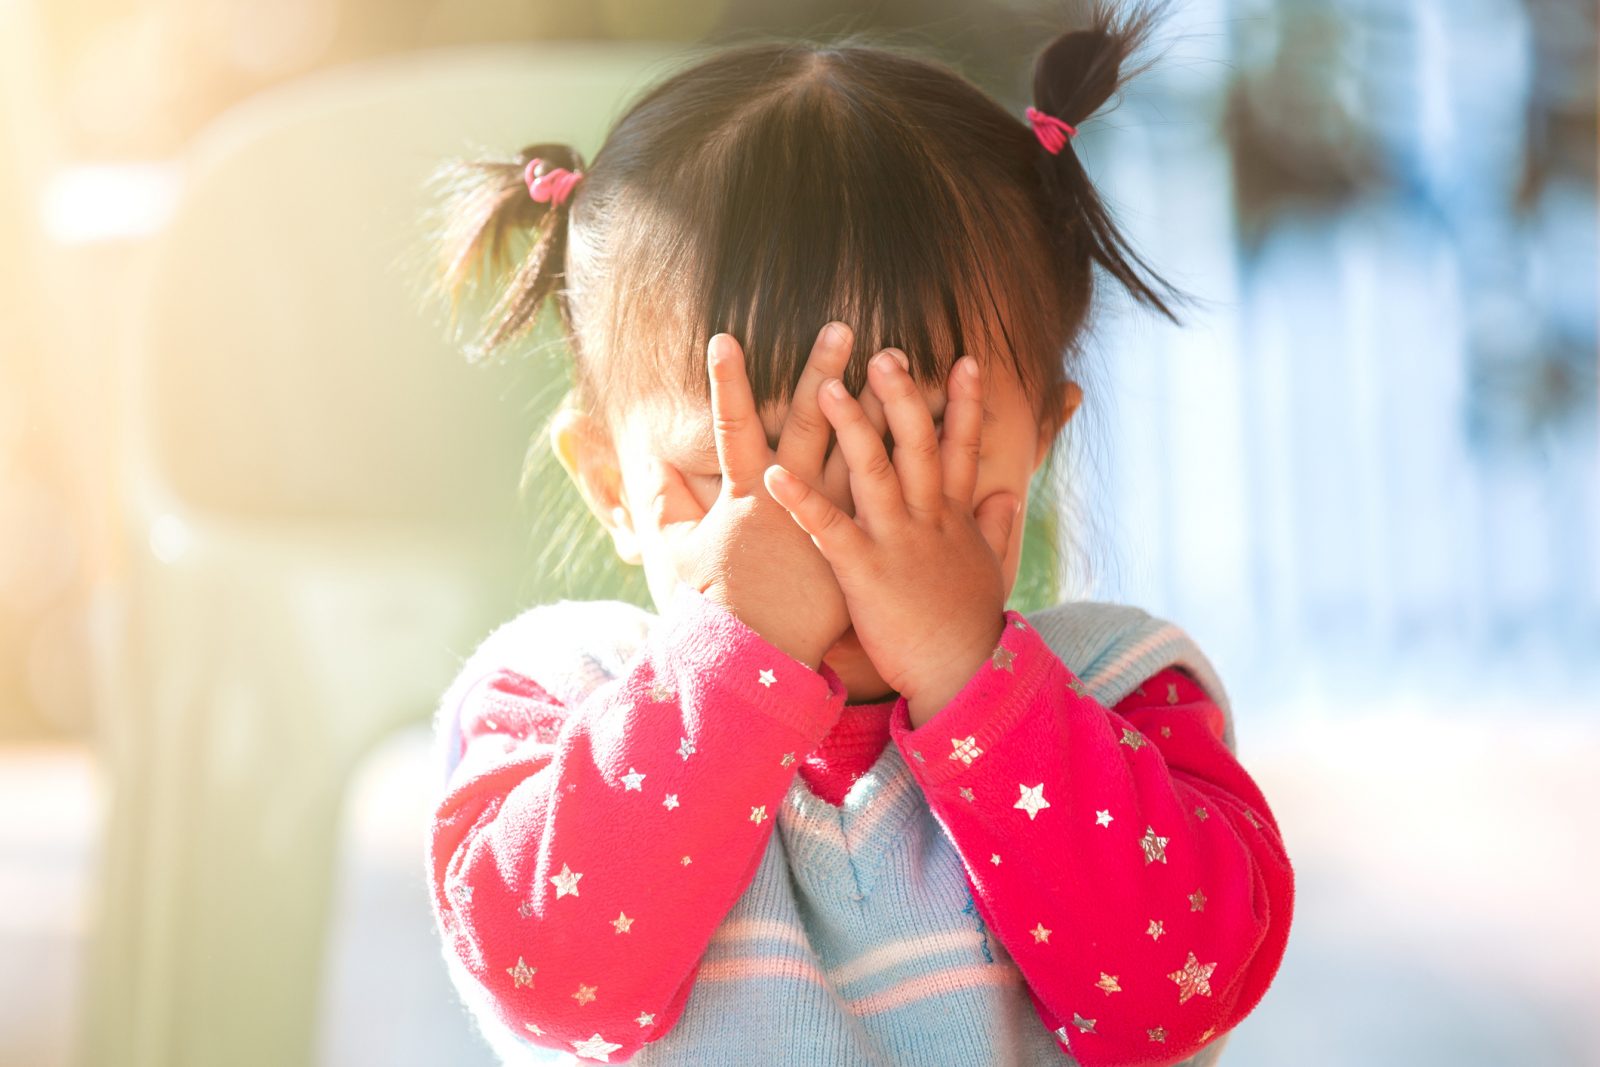 A small child covers her face with her hands.